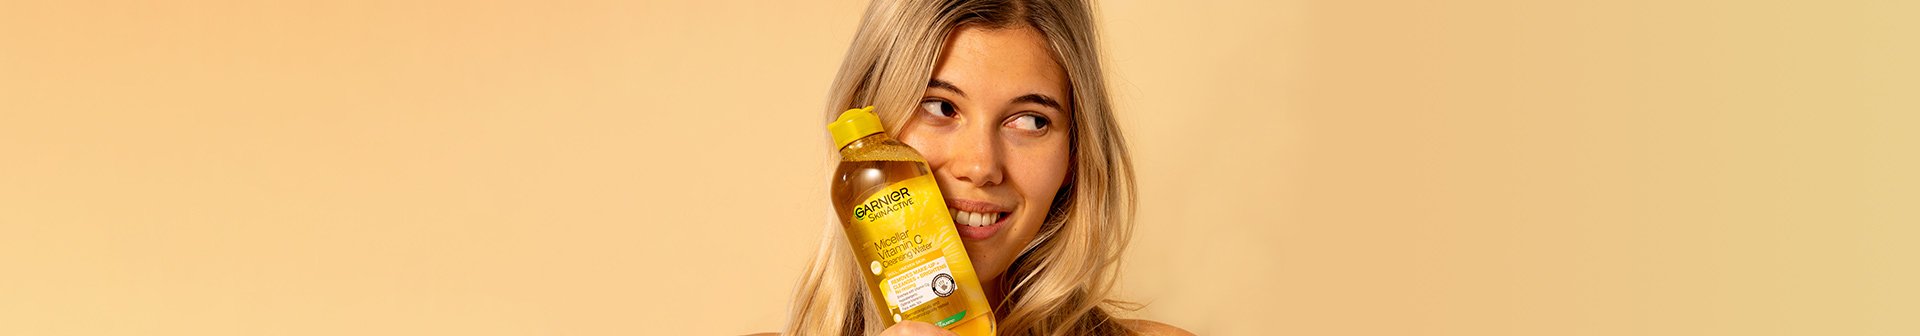 Blonde female holding vitamin c micellar water against face